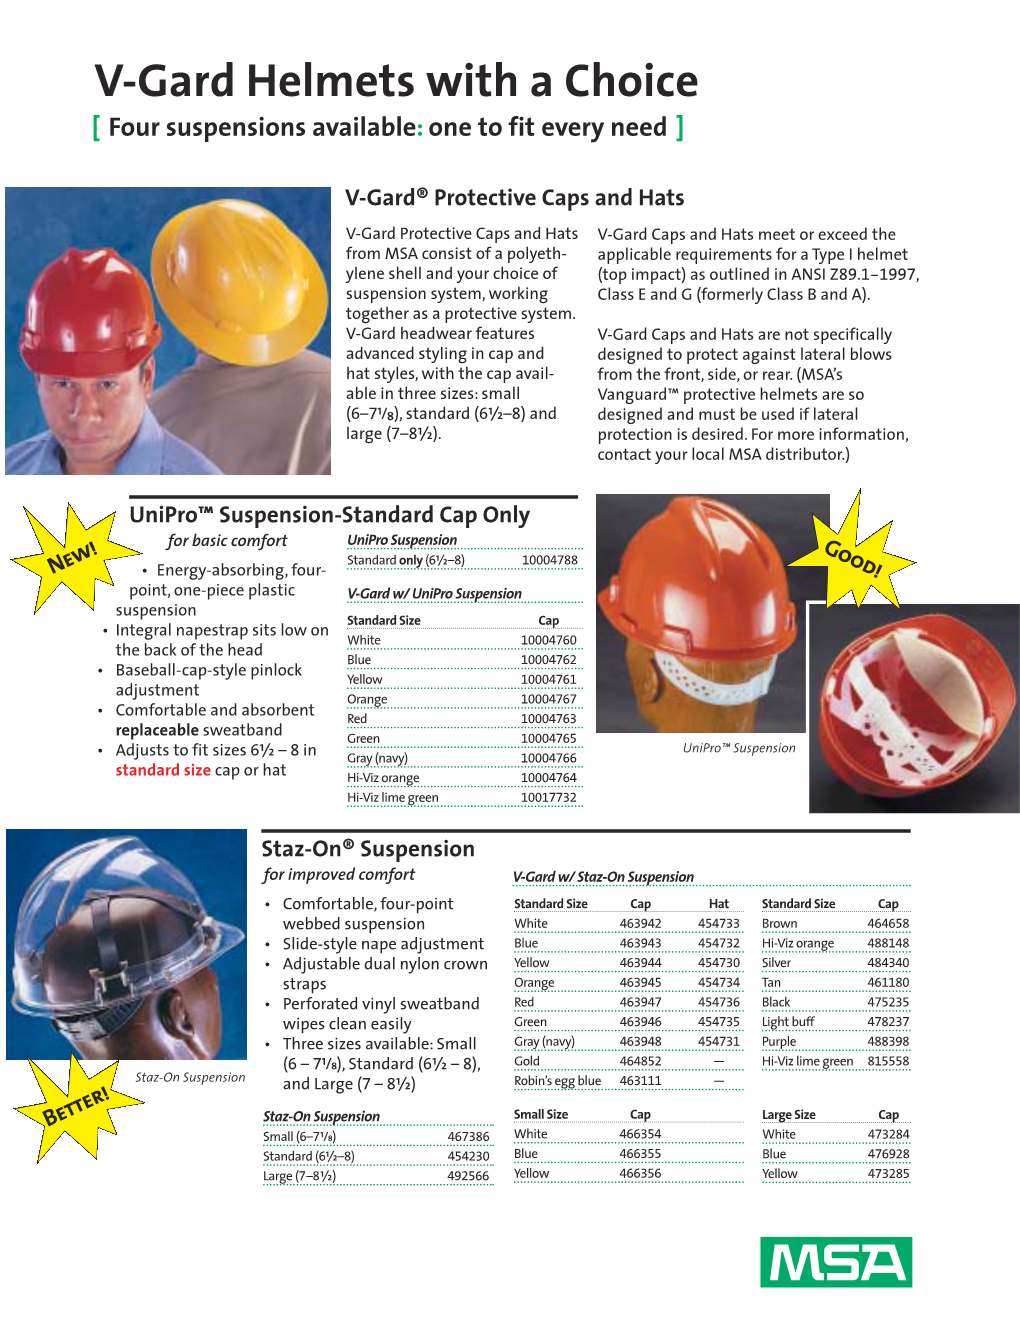 V-Gard Helmets with a Choice [ Four Suspensions Available: One to Fit Every Need ]